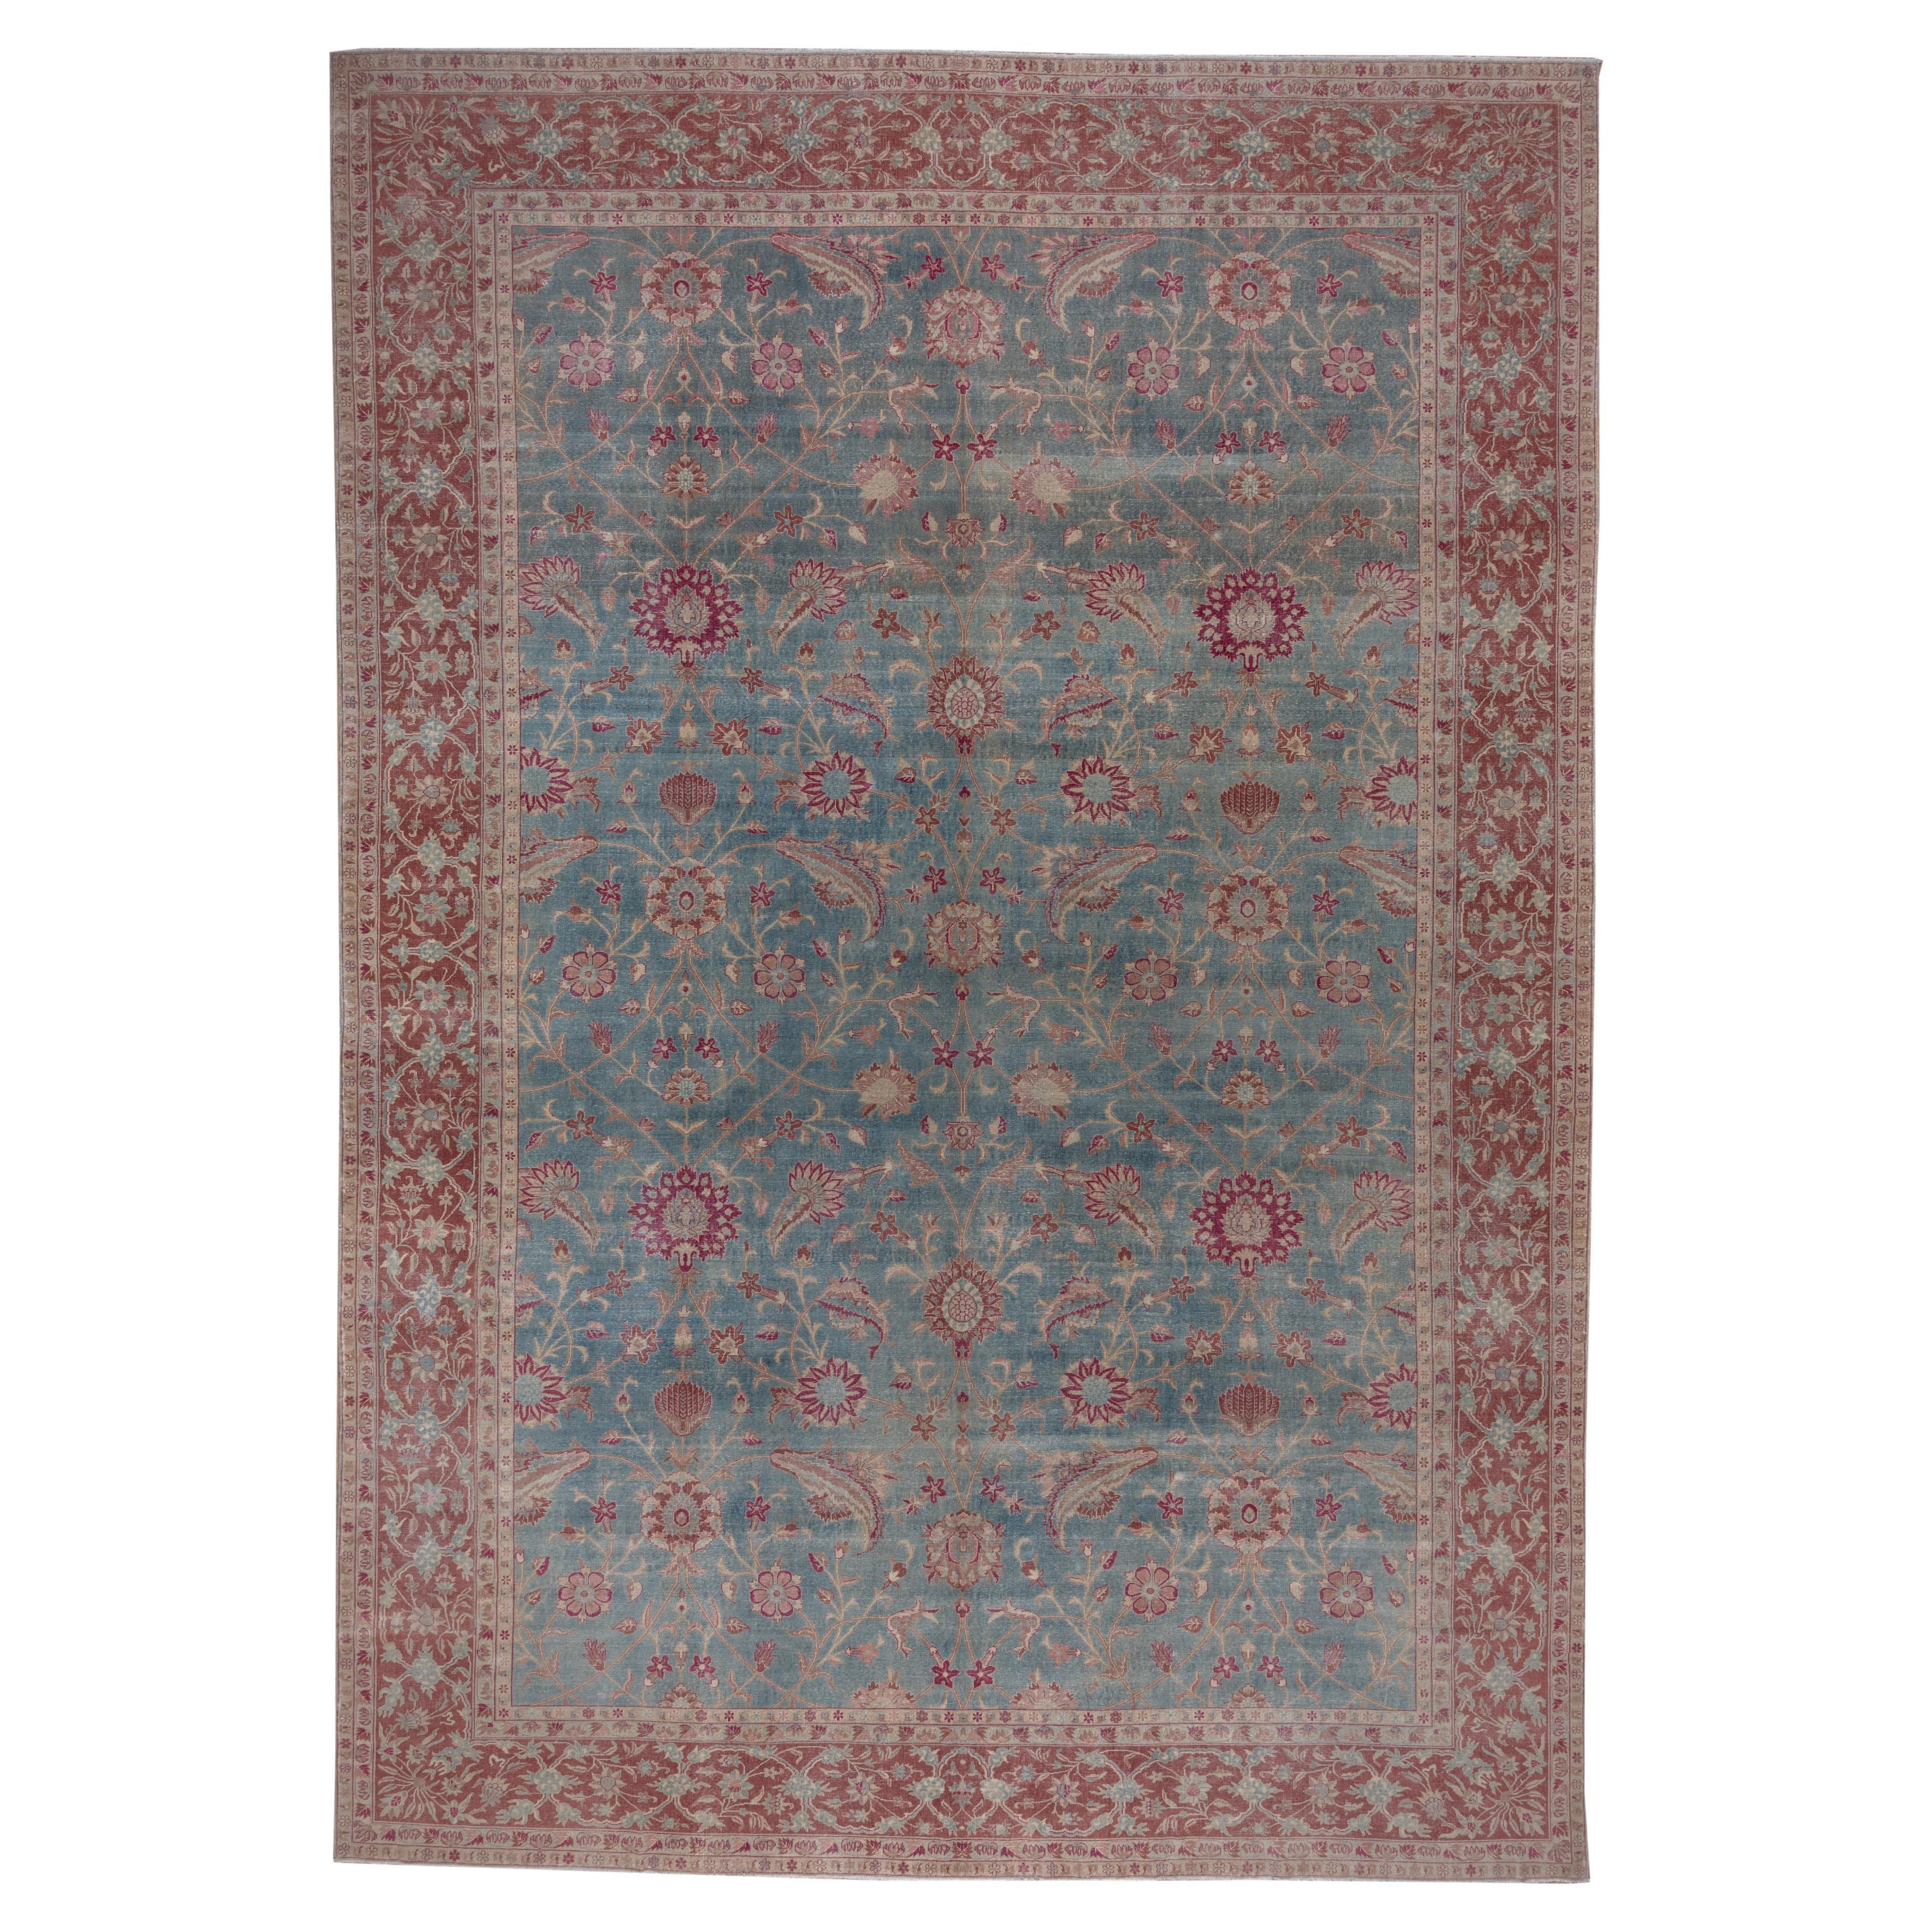 Antique Turkish Sivas Rug, Allover Blue Floral Field, Red Borders, Circa 1920s For Sale